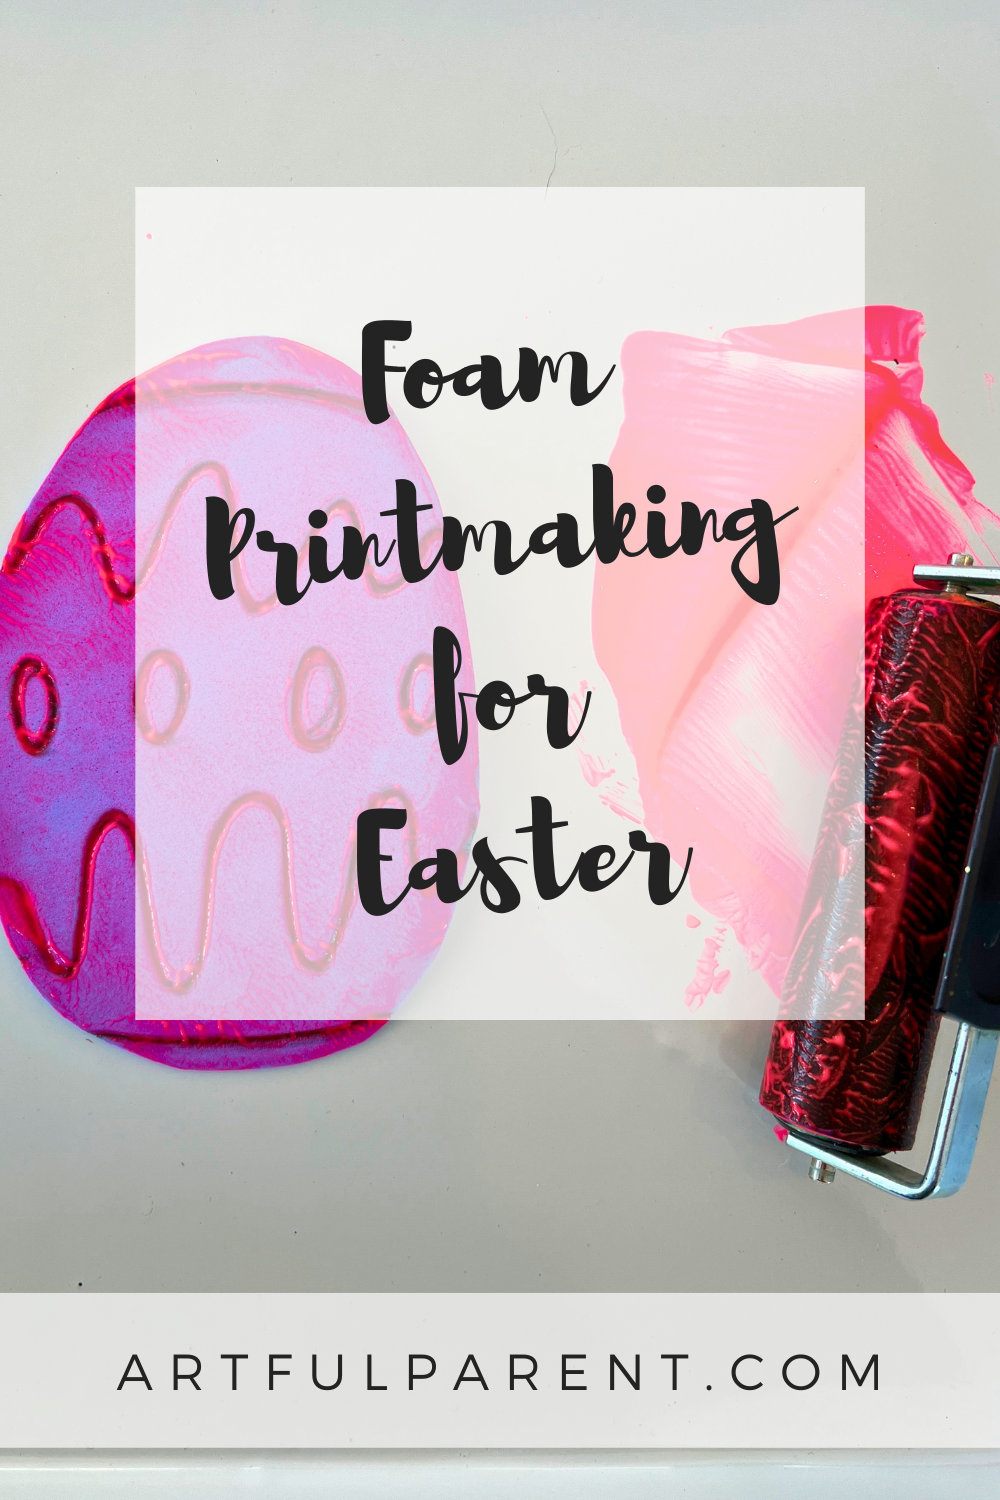 Foam Printmaking with Kids for Easter